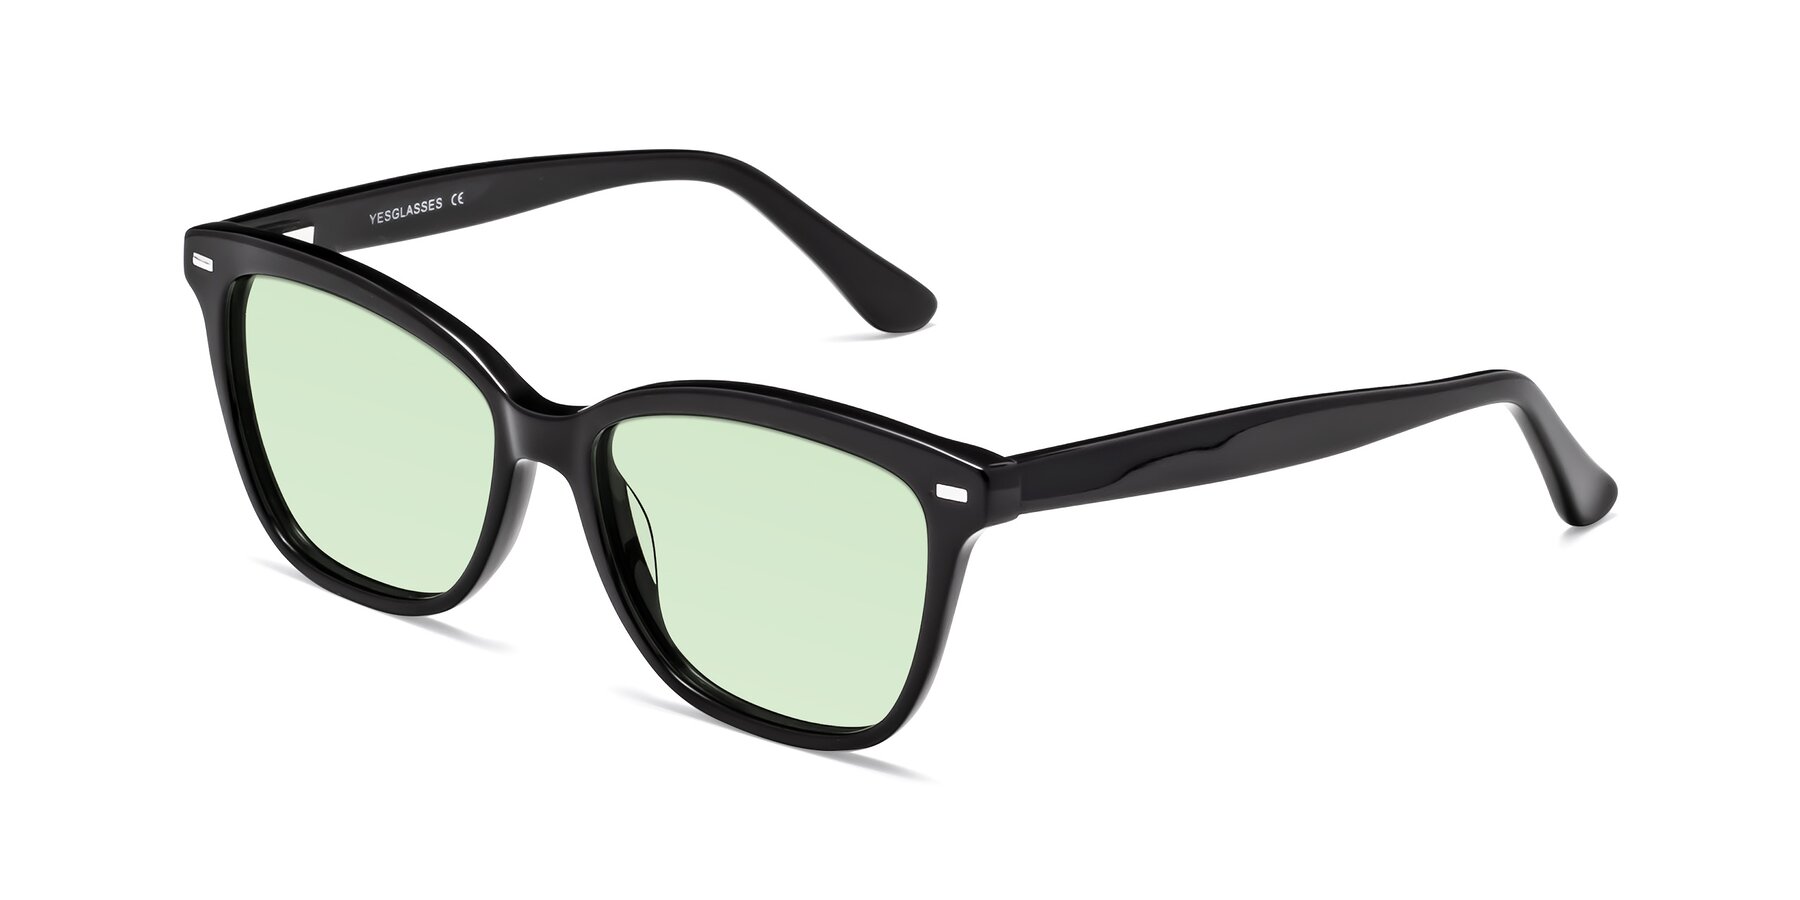 Angle of 17485 in Black with Light Green Tinted Lenses